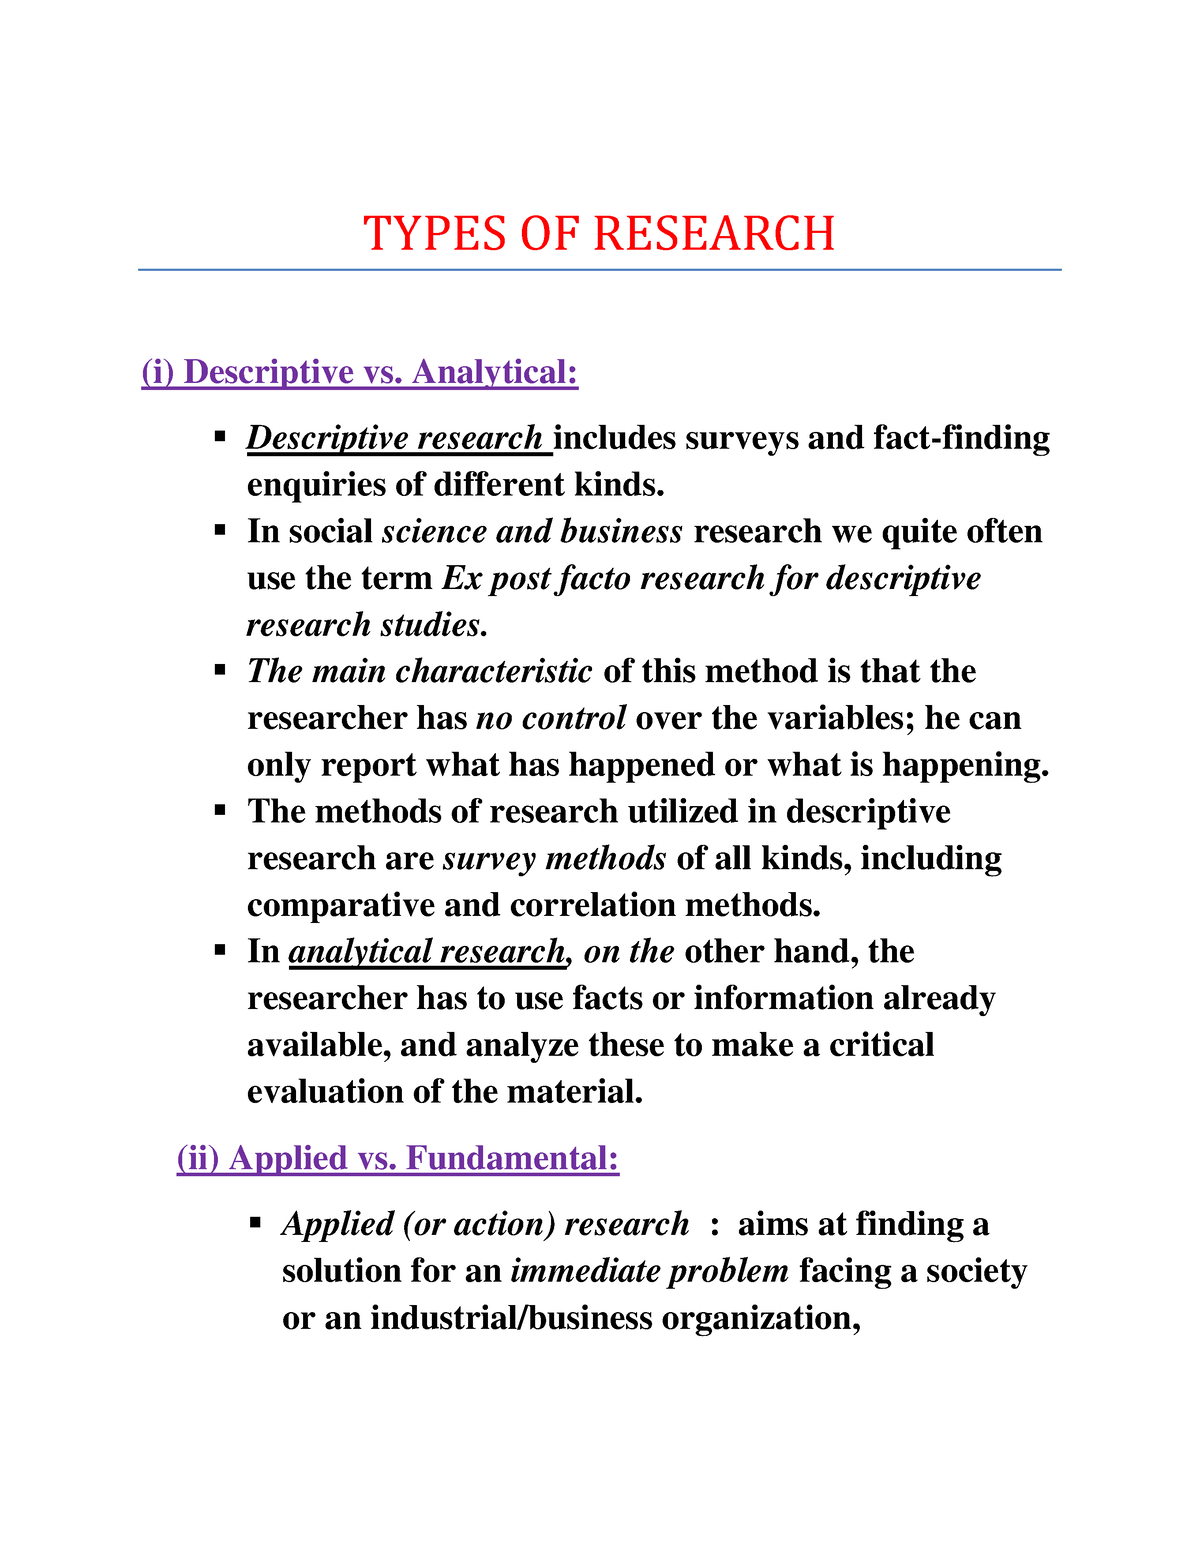 analytical research easy definition